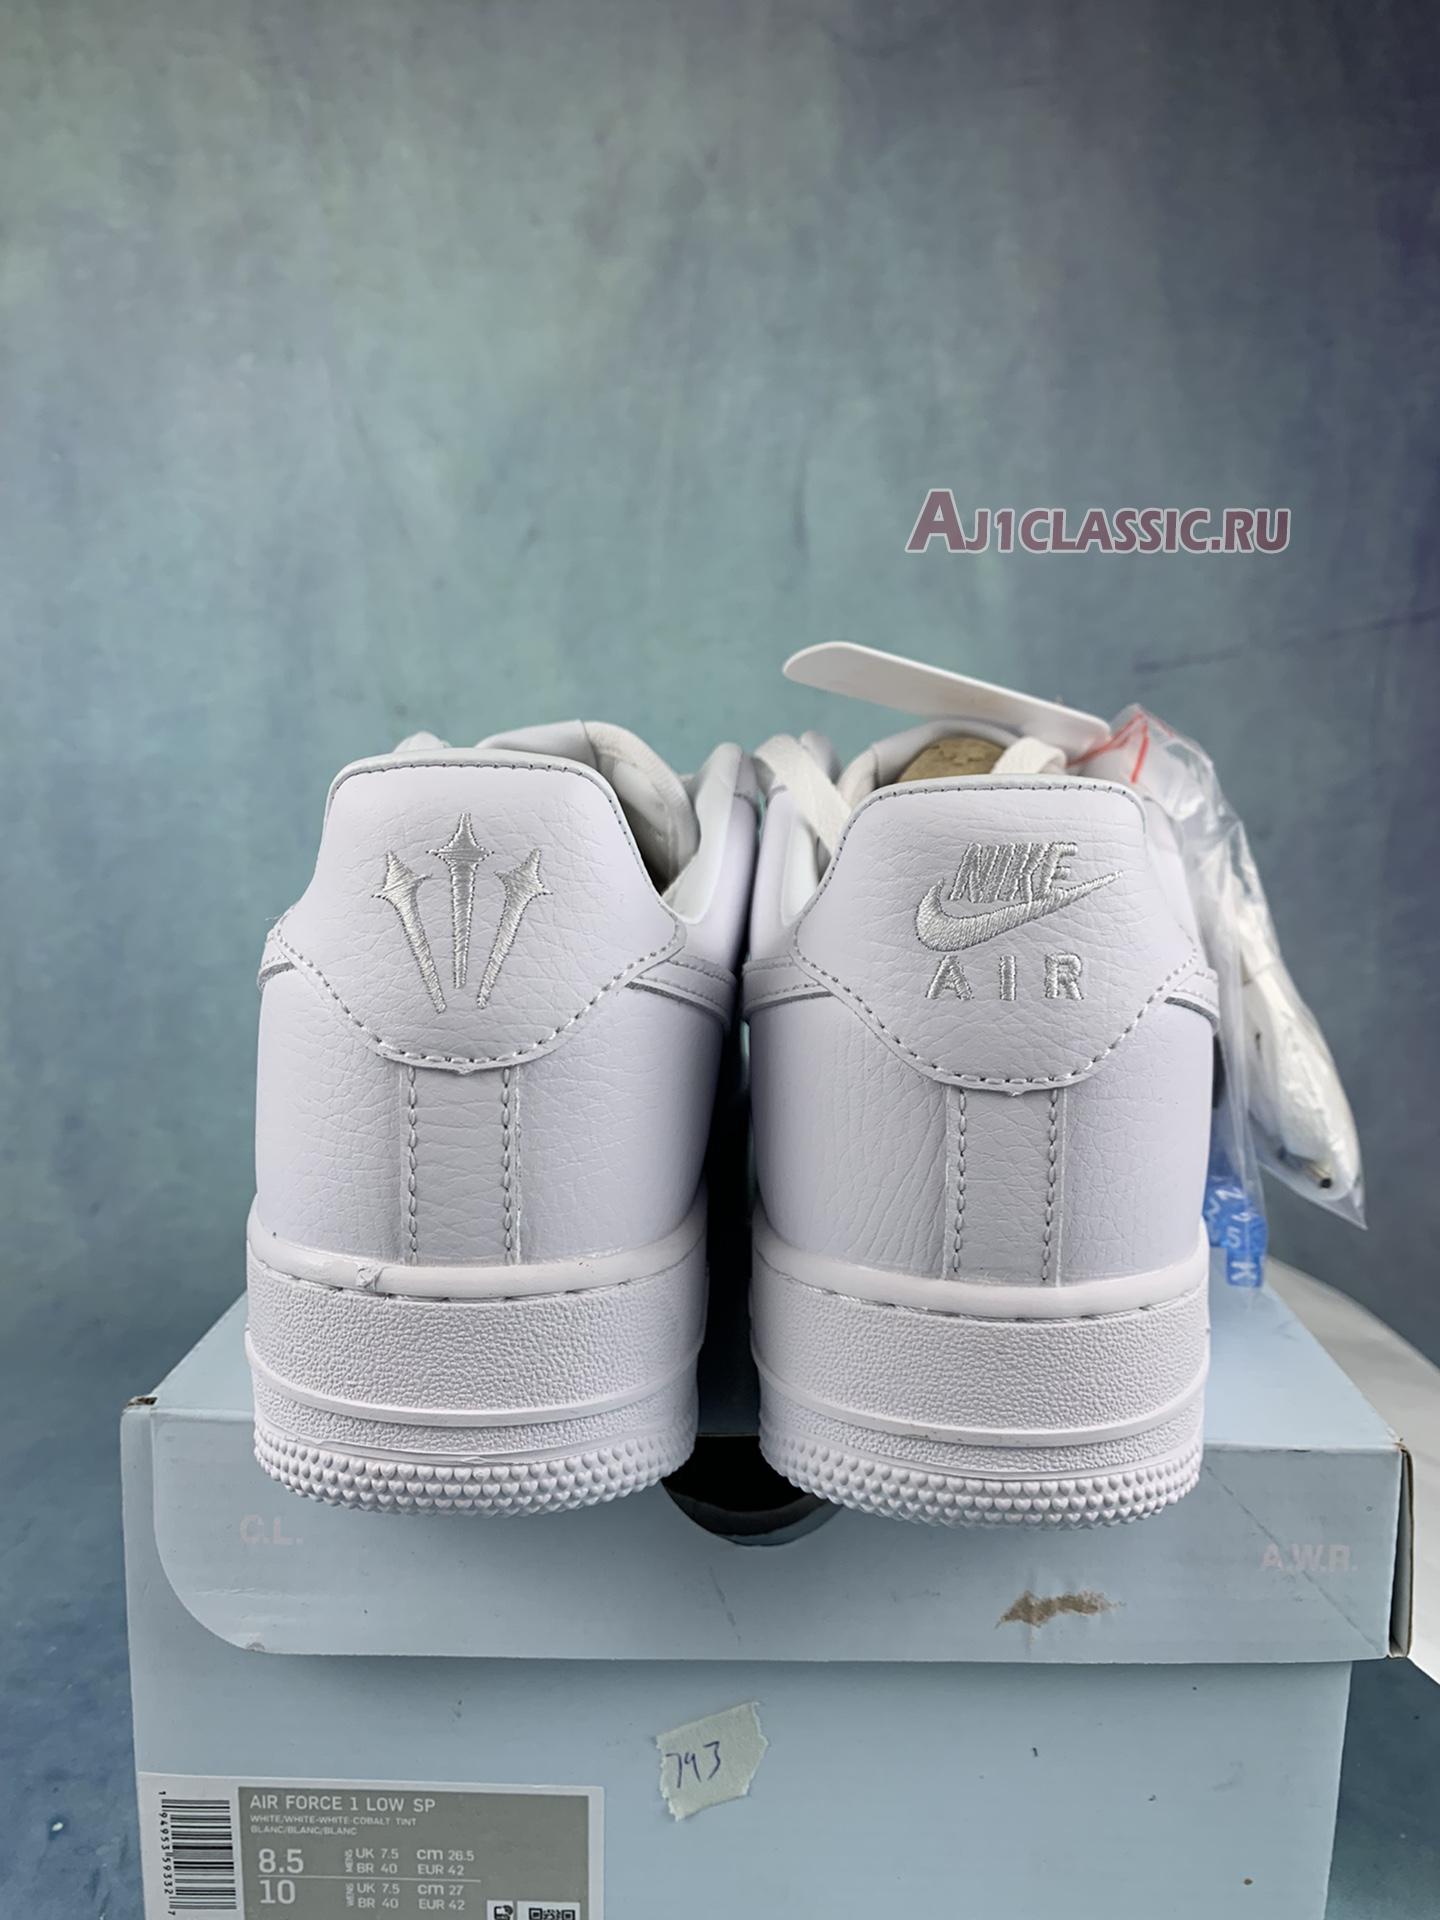 NOCTA x Nike Air Force 1 Low "Certified Lover Boy" With Love You Forever Book CZ8065-100